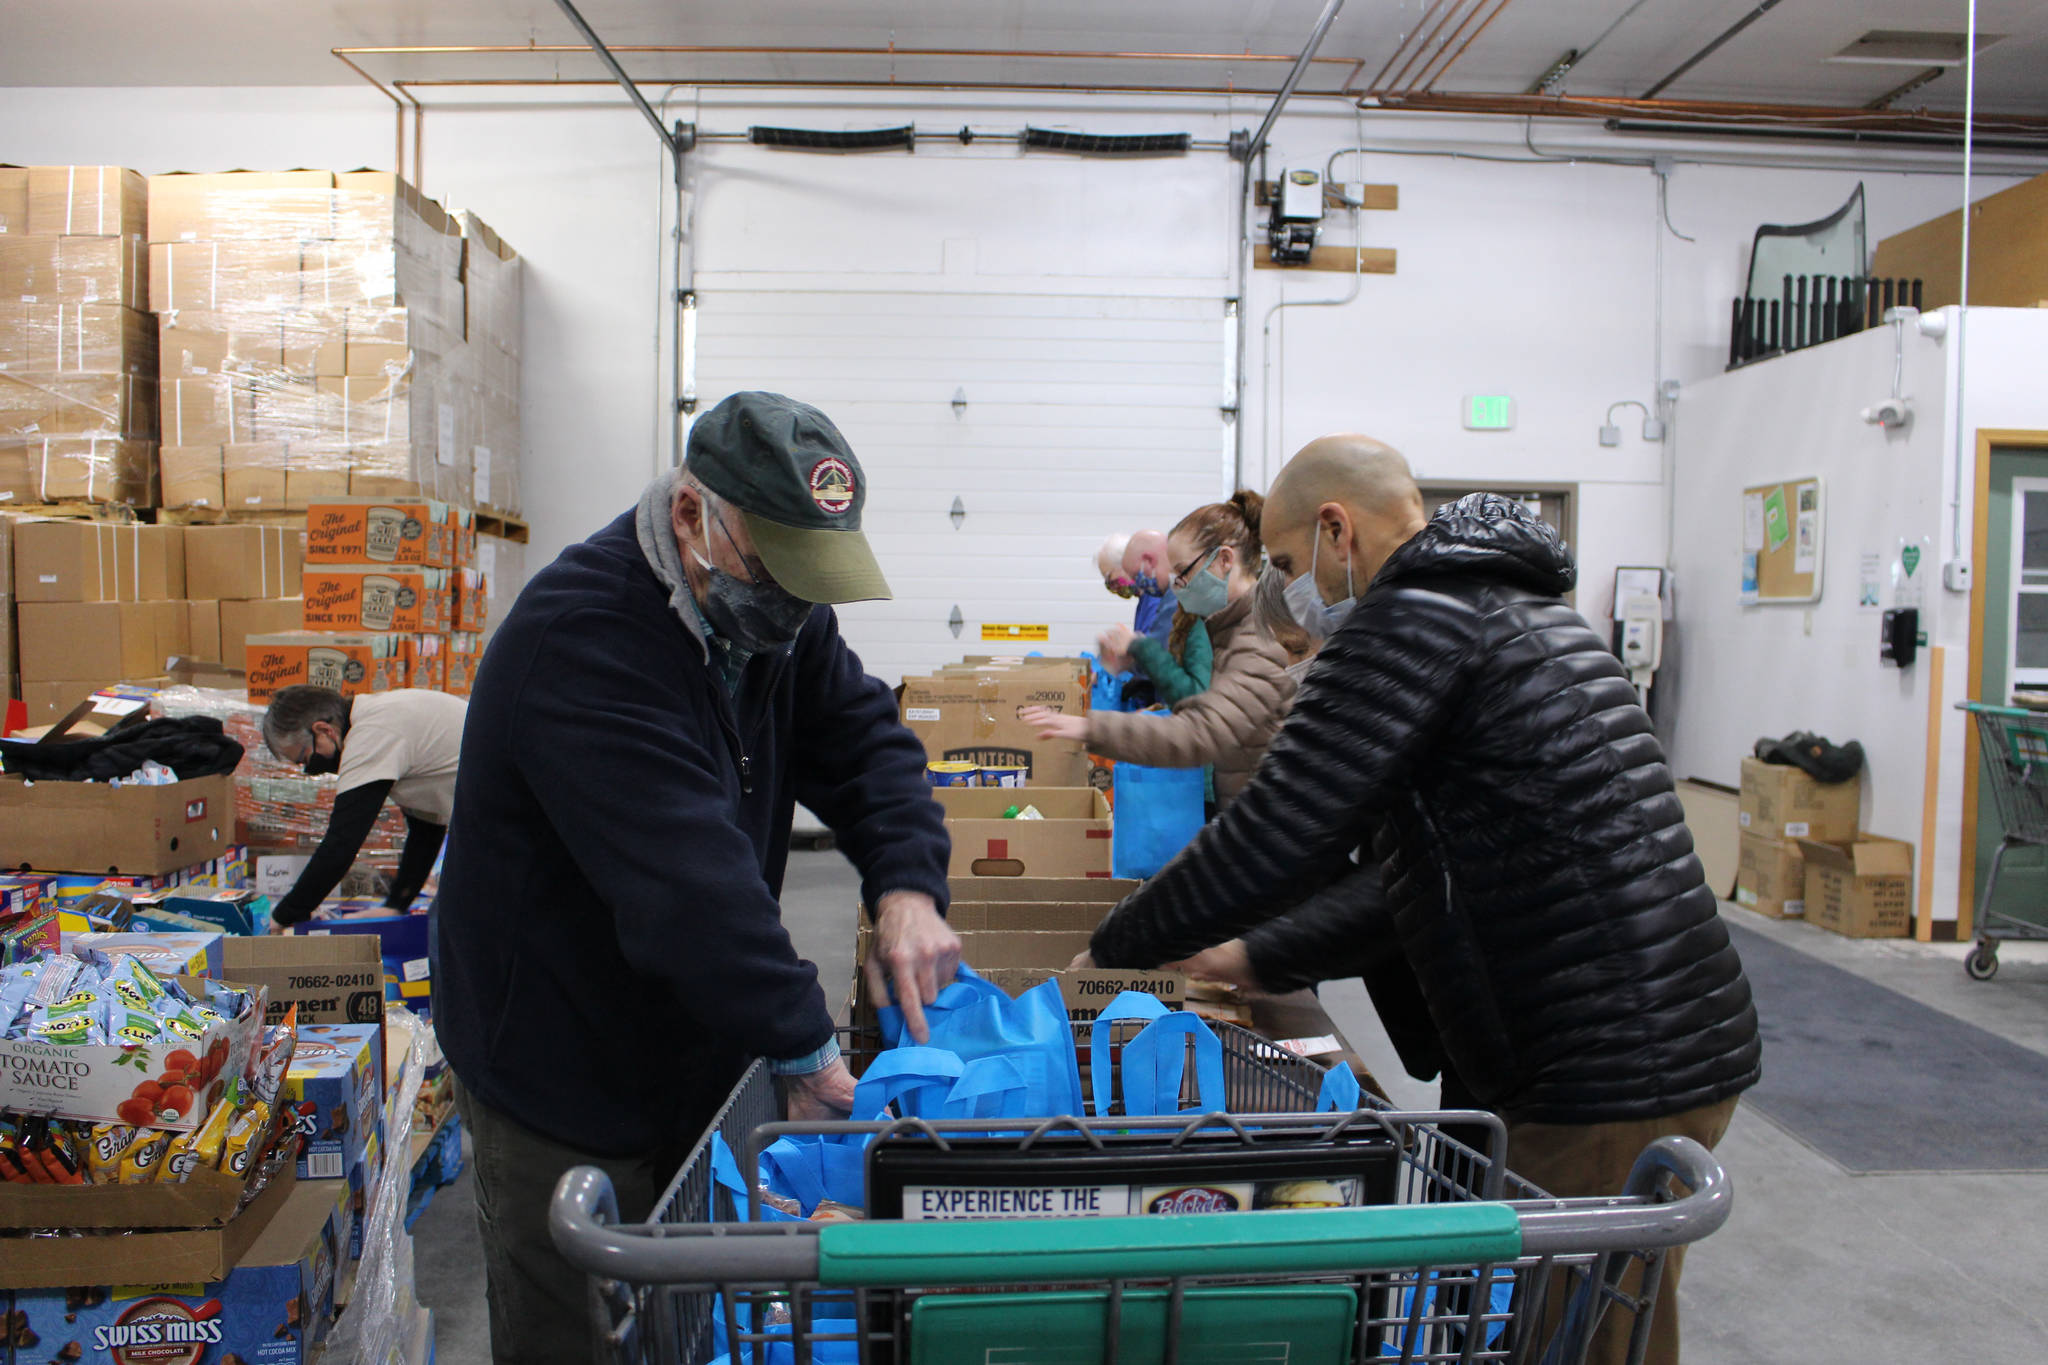 Volunteers Bill Kelley and Frank Alioto prepare bags of food to be distributed during the upcoming Project Homeless Connect even at the Kenai Peninsula Food Bank in Soldotna, Alaska on Jan. 23, 2021. (Photo by Brian Mazurek/Peninsula Clarion)